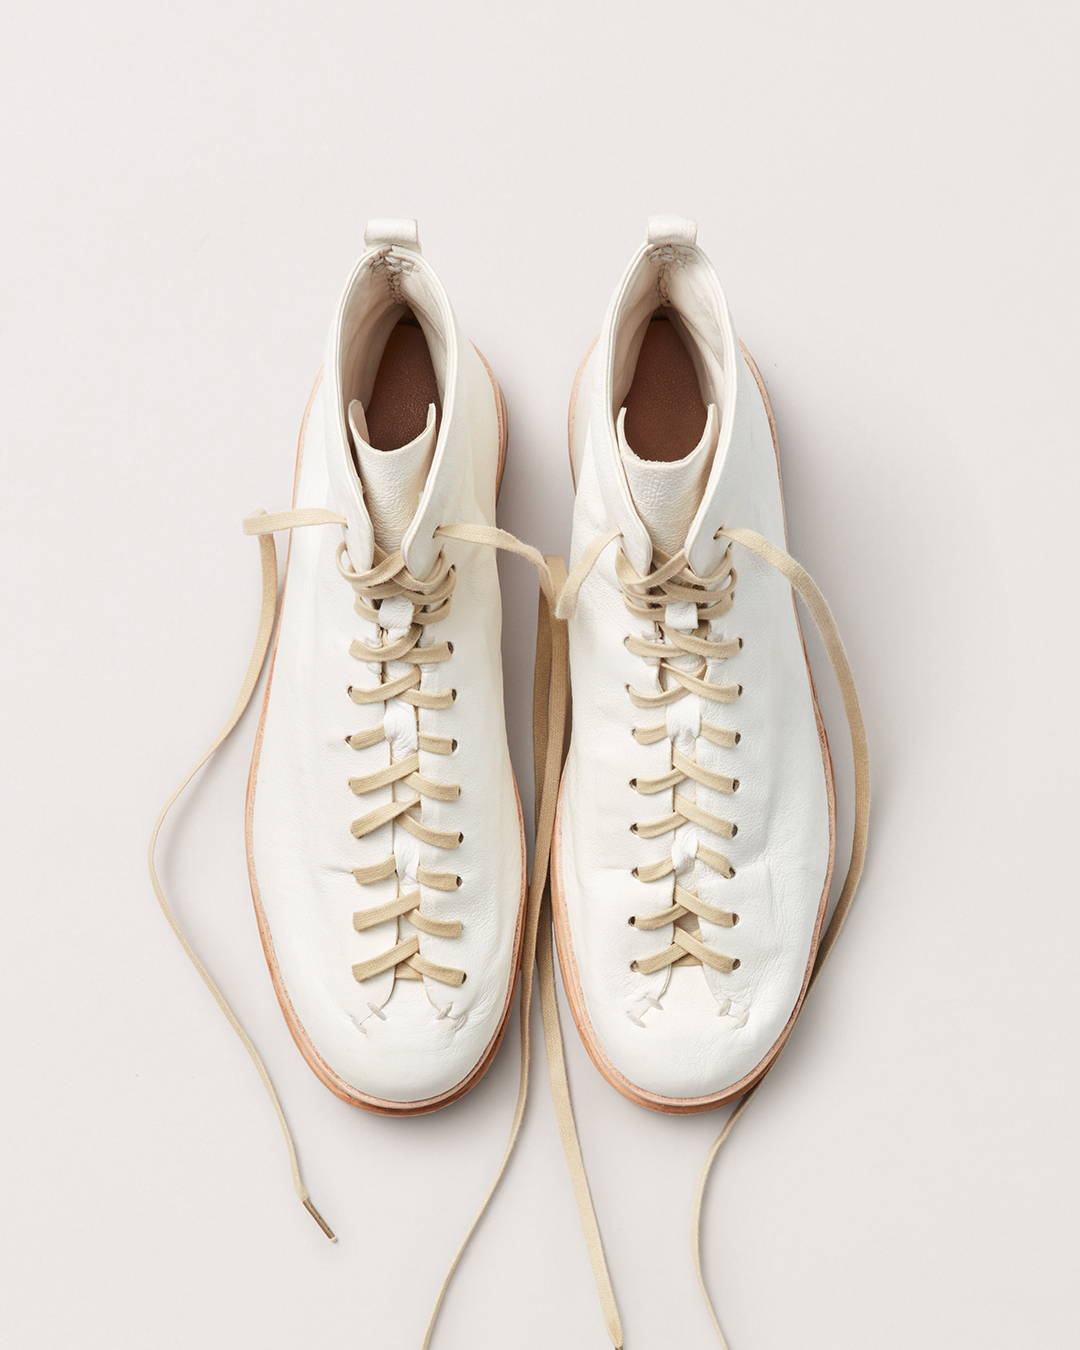 FEIT Collection – Goodyear